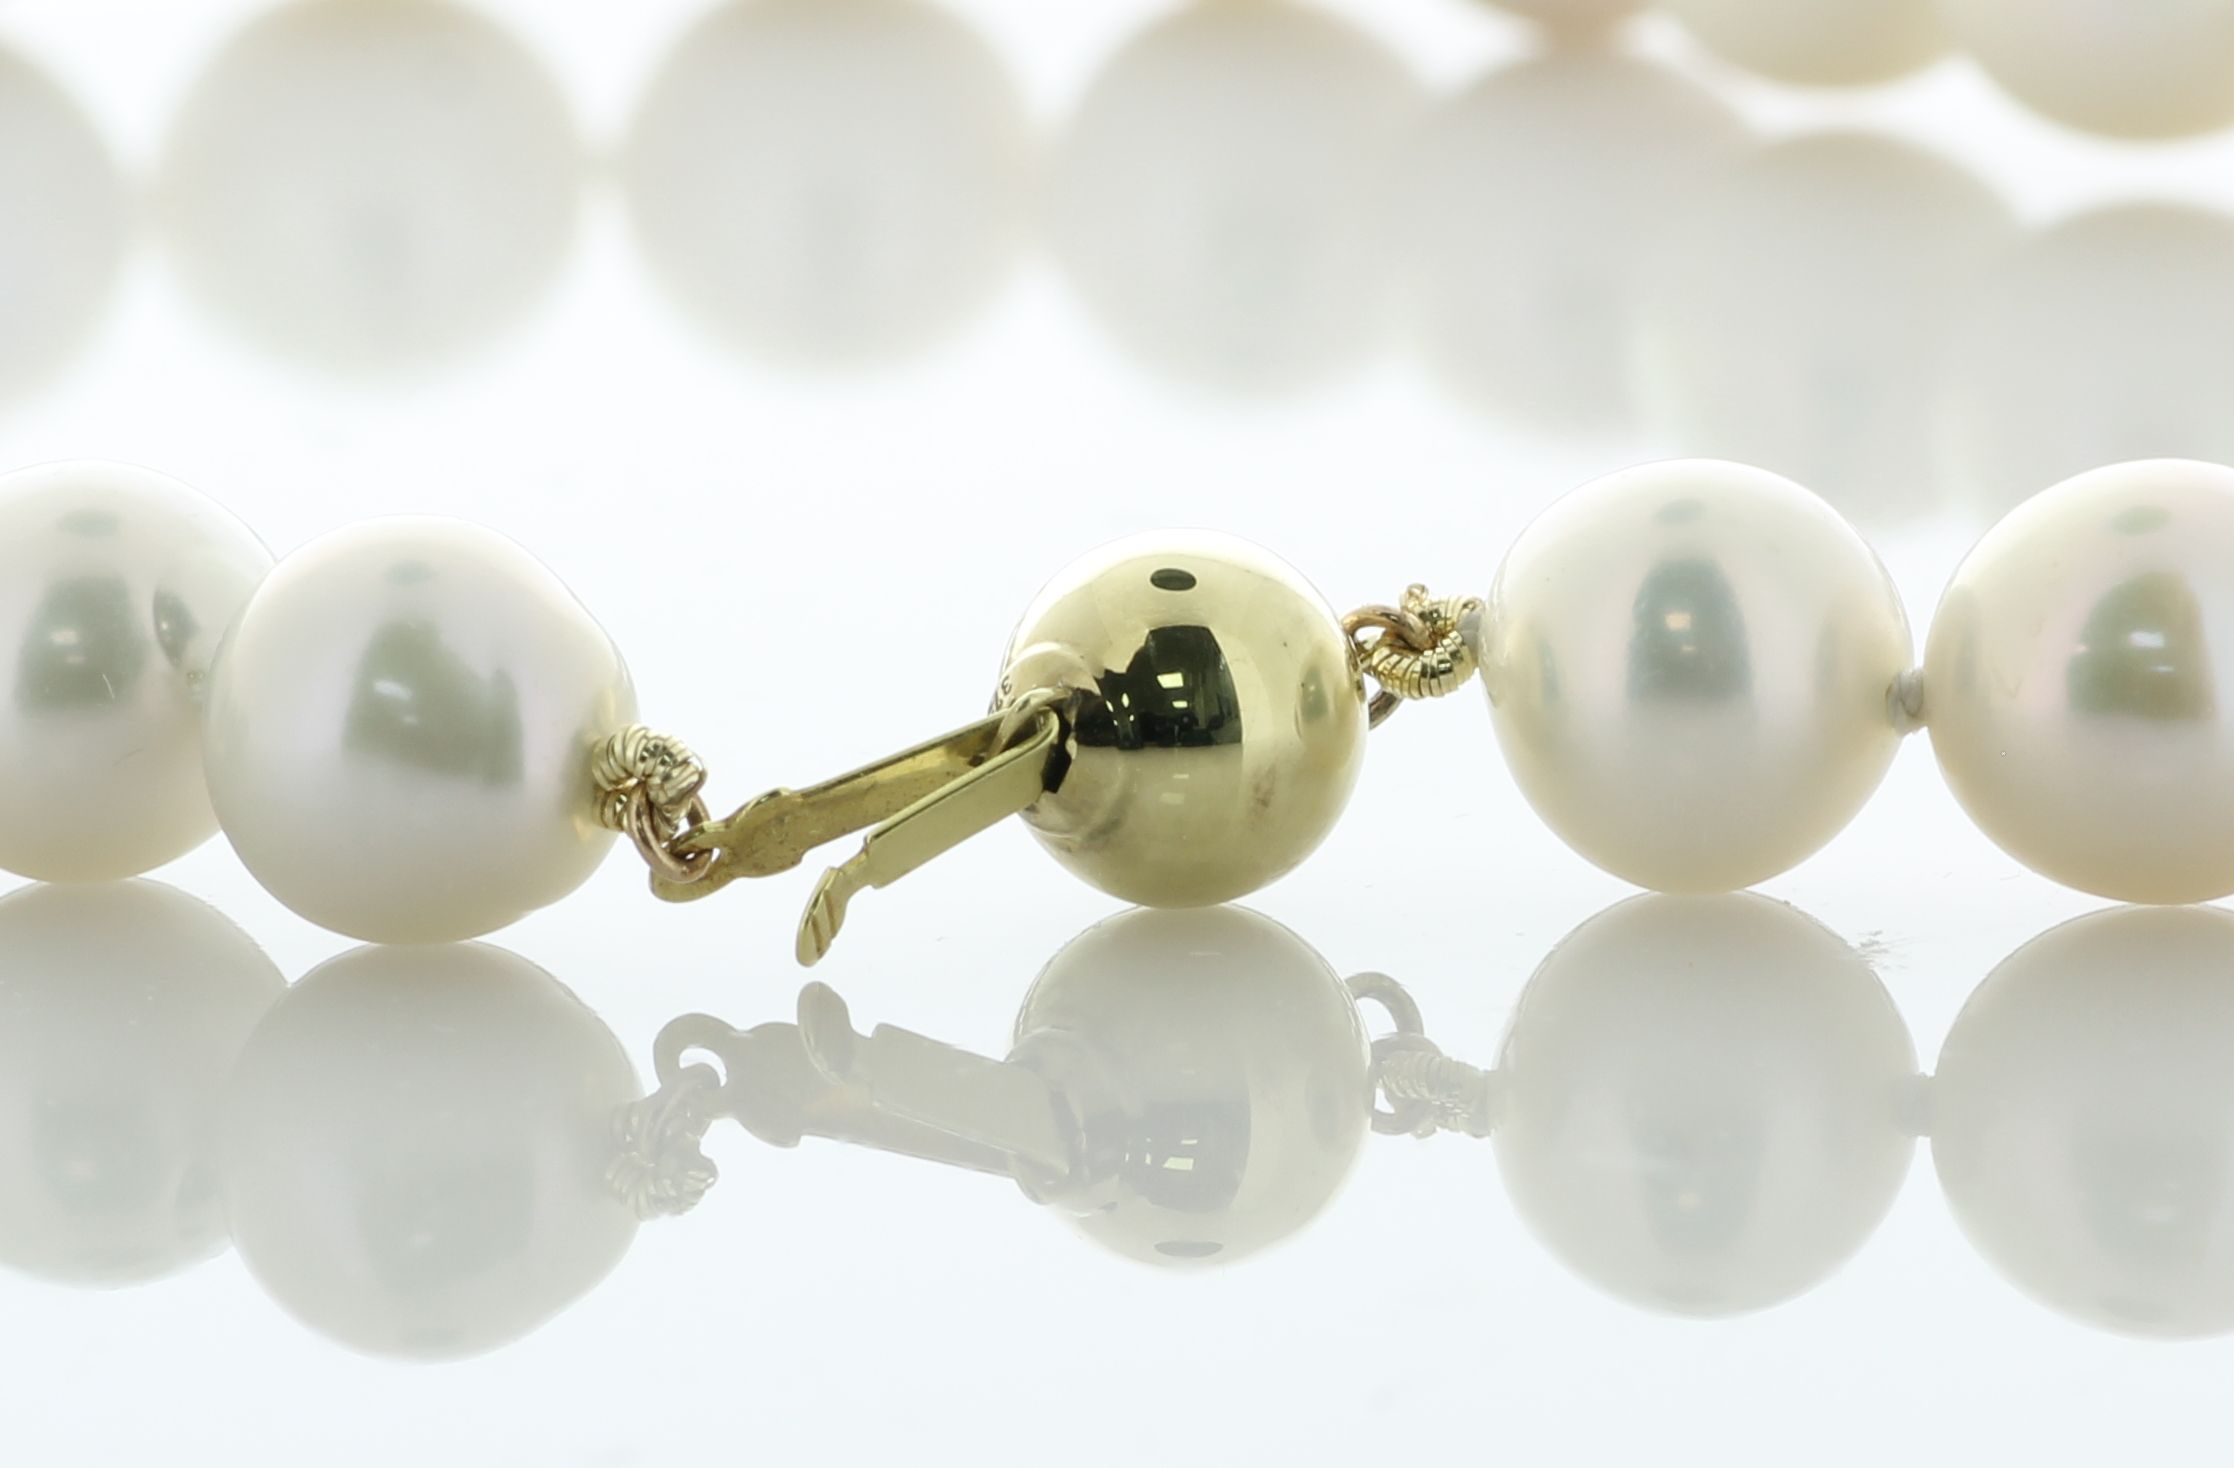 18 inch White Round 10.0 - 12.0mm Ming Pearl Necklace With 9ct Yellow Gold Clasp - Image 5 of 7